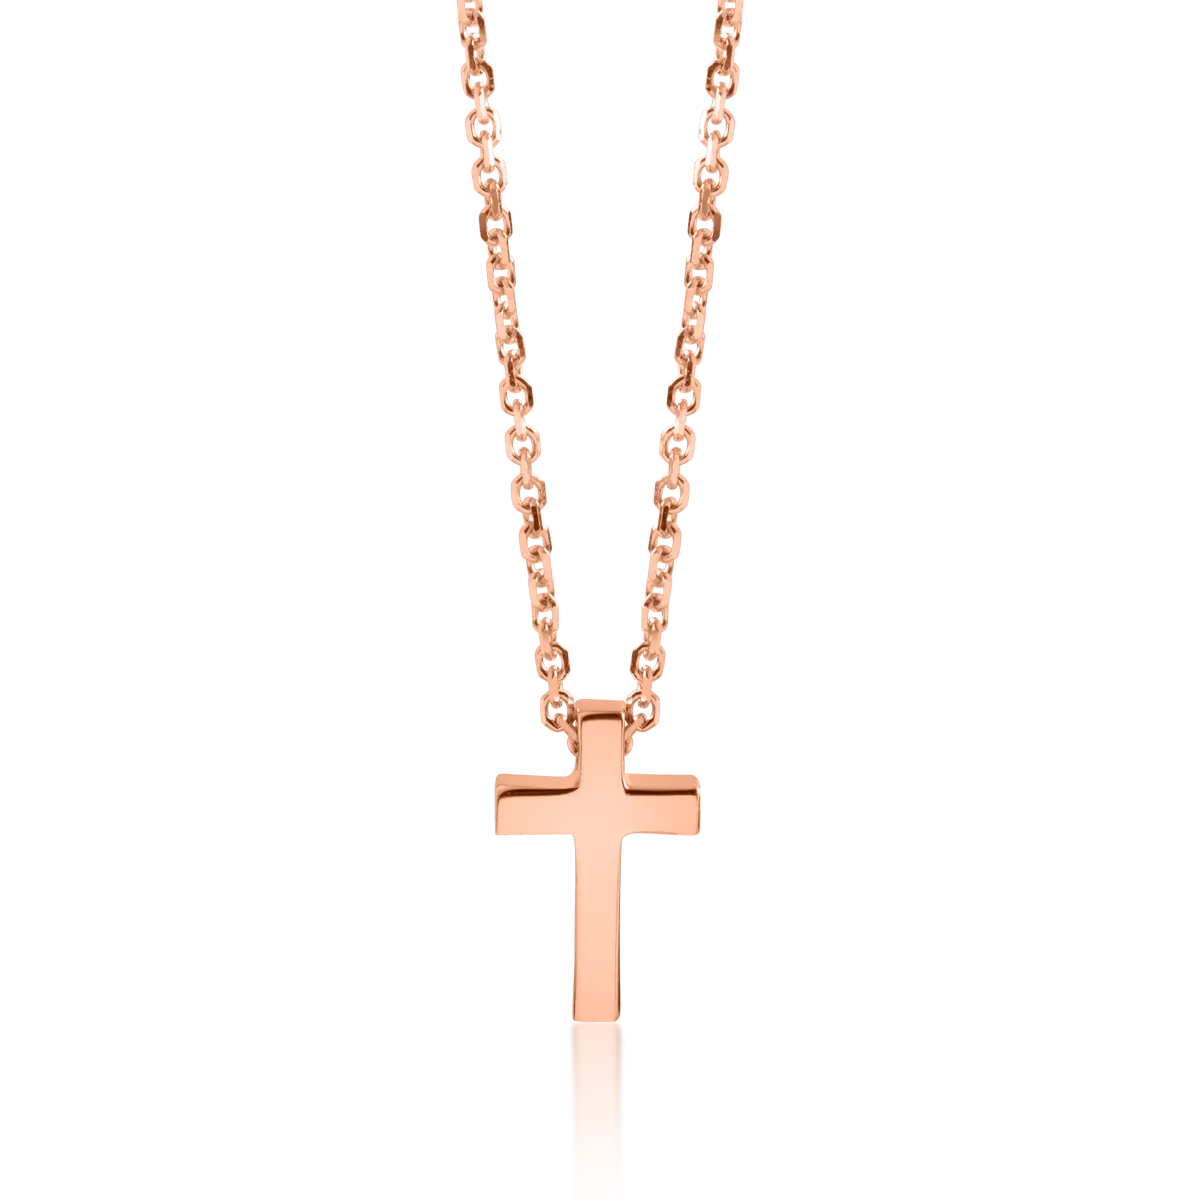 14K rose gold chain with cross pendant